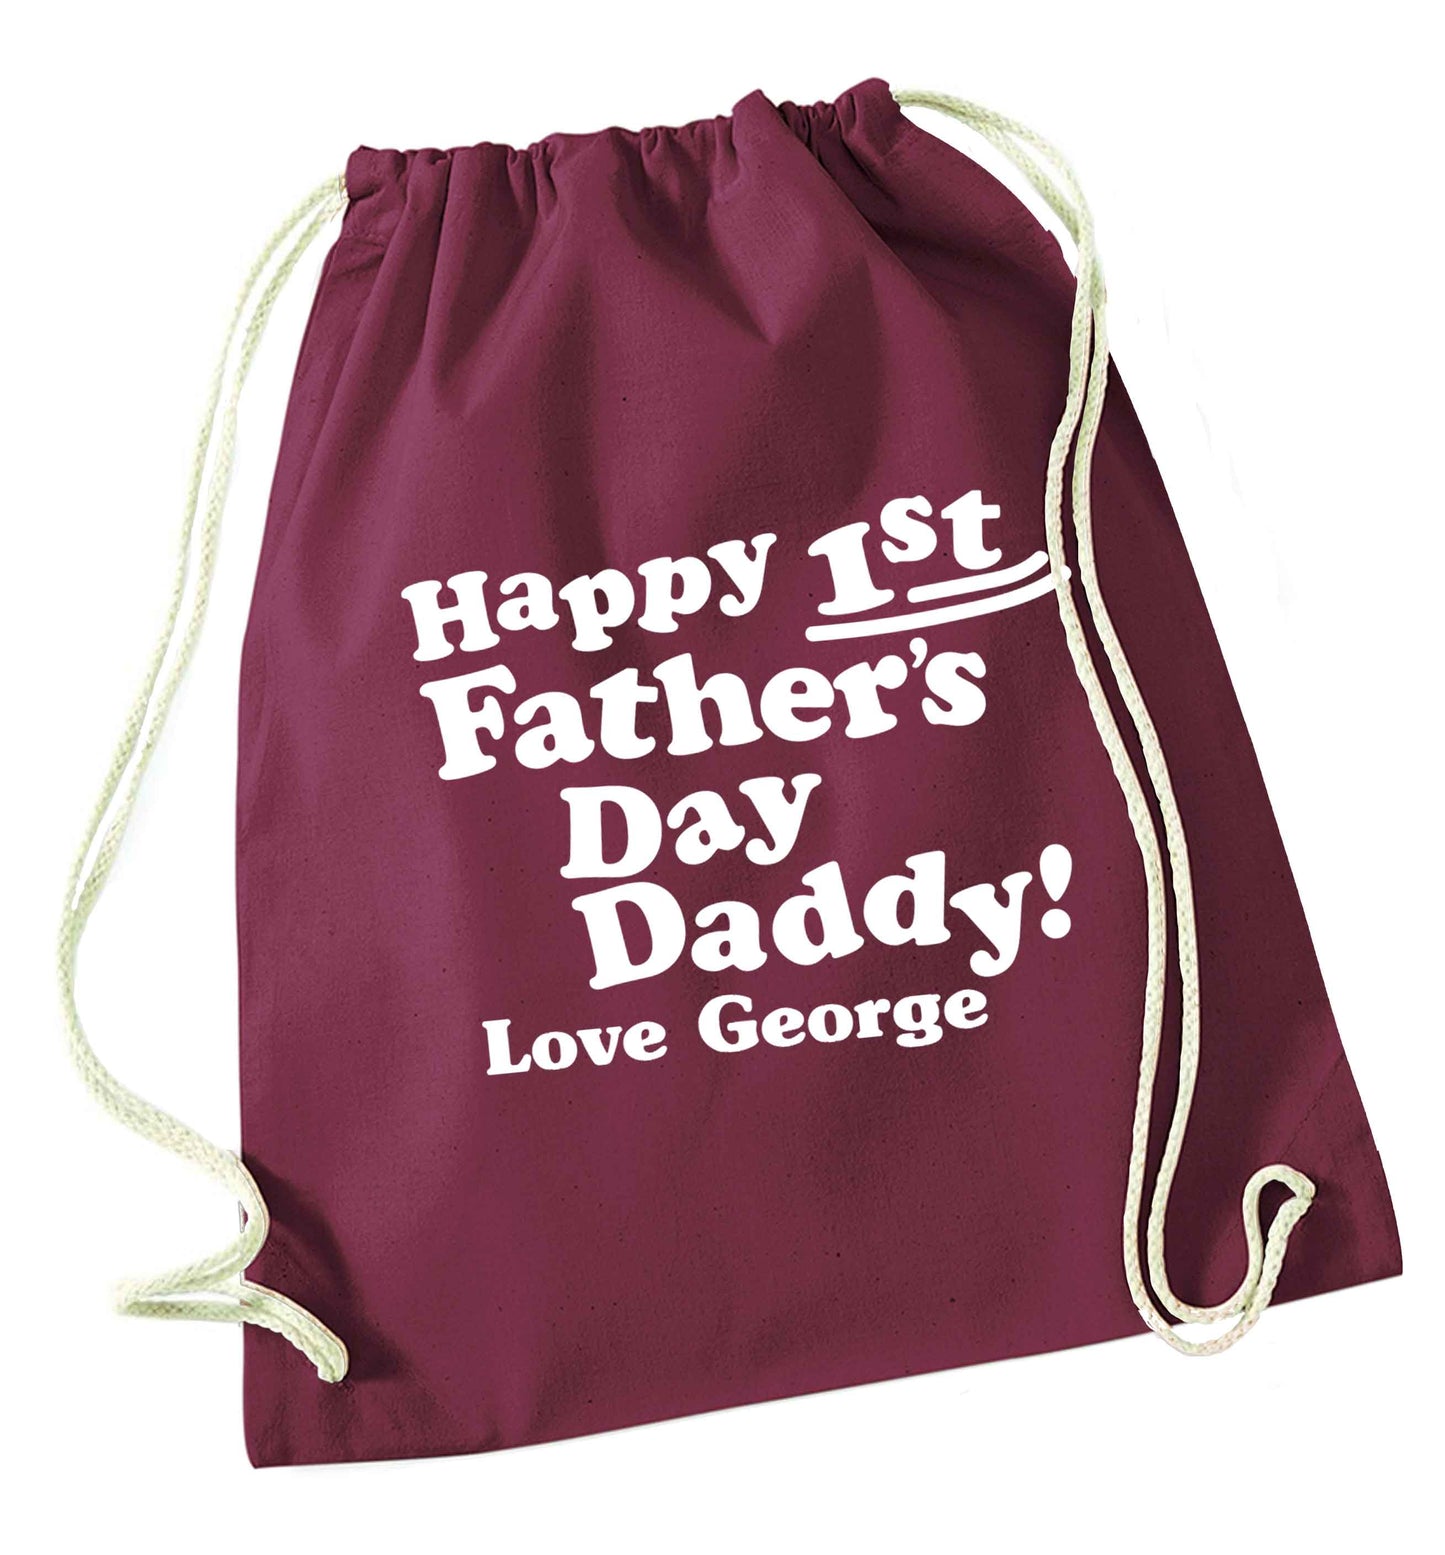 Happy first Fathers Day daddy love personalised maroon drawstring bag